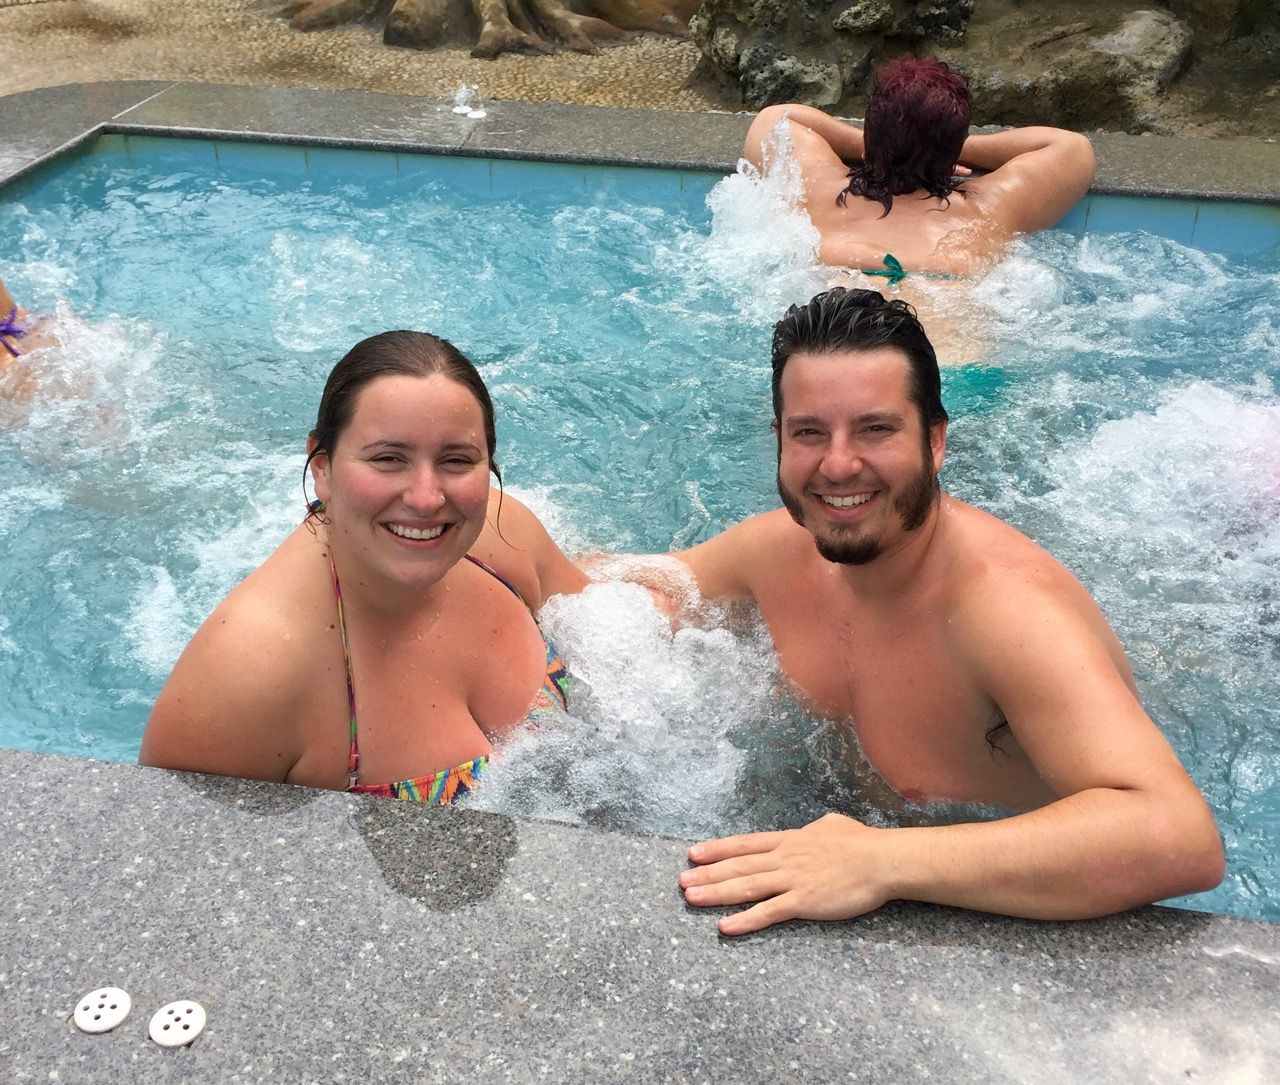 Two people smiling in a spa.